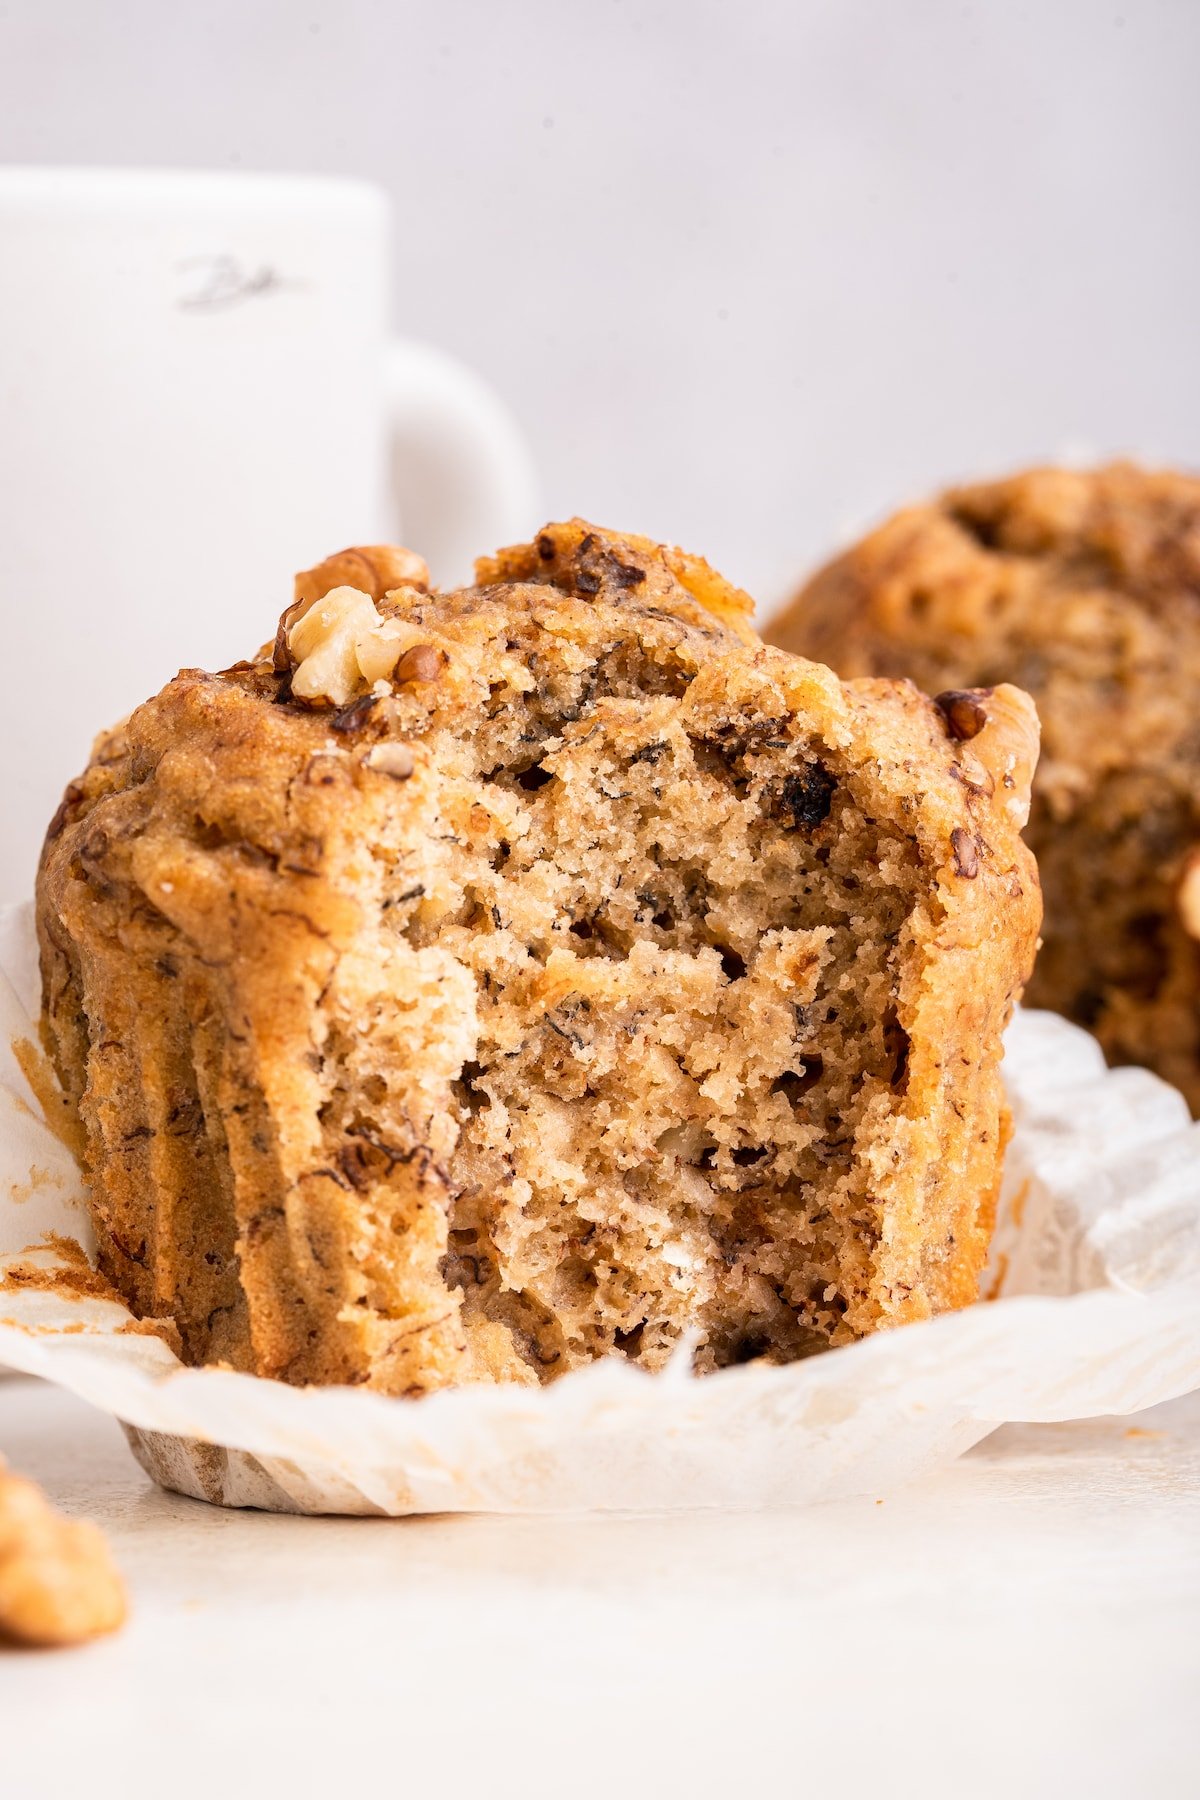 A banana muffin with a bite taken from it.